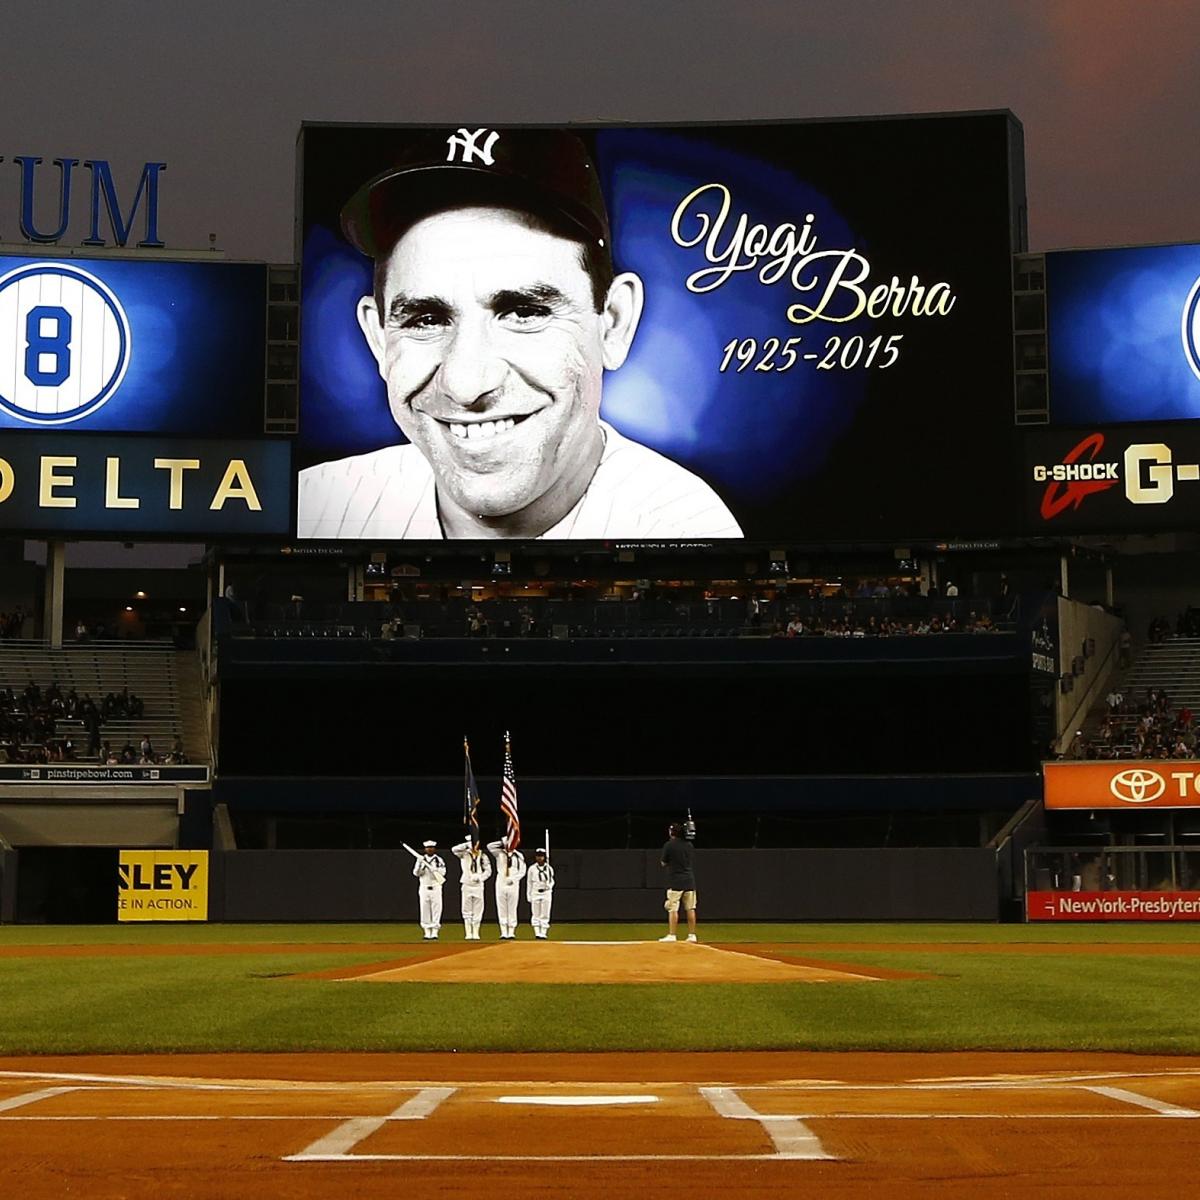 Yogi Berra, Willie Mays to Receive Presidential Medals of Freedom